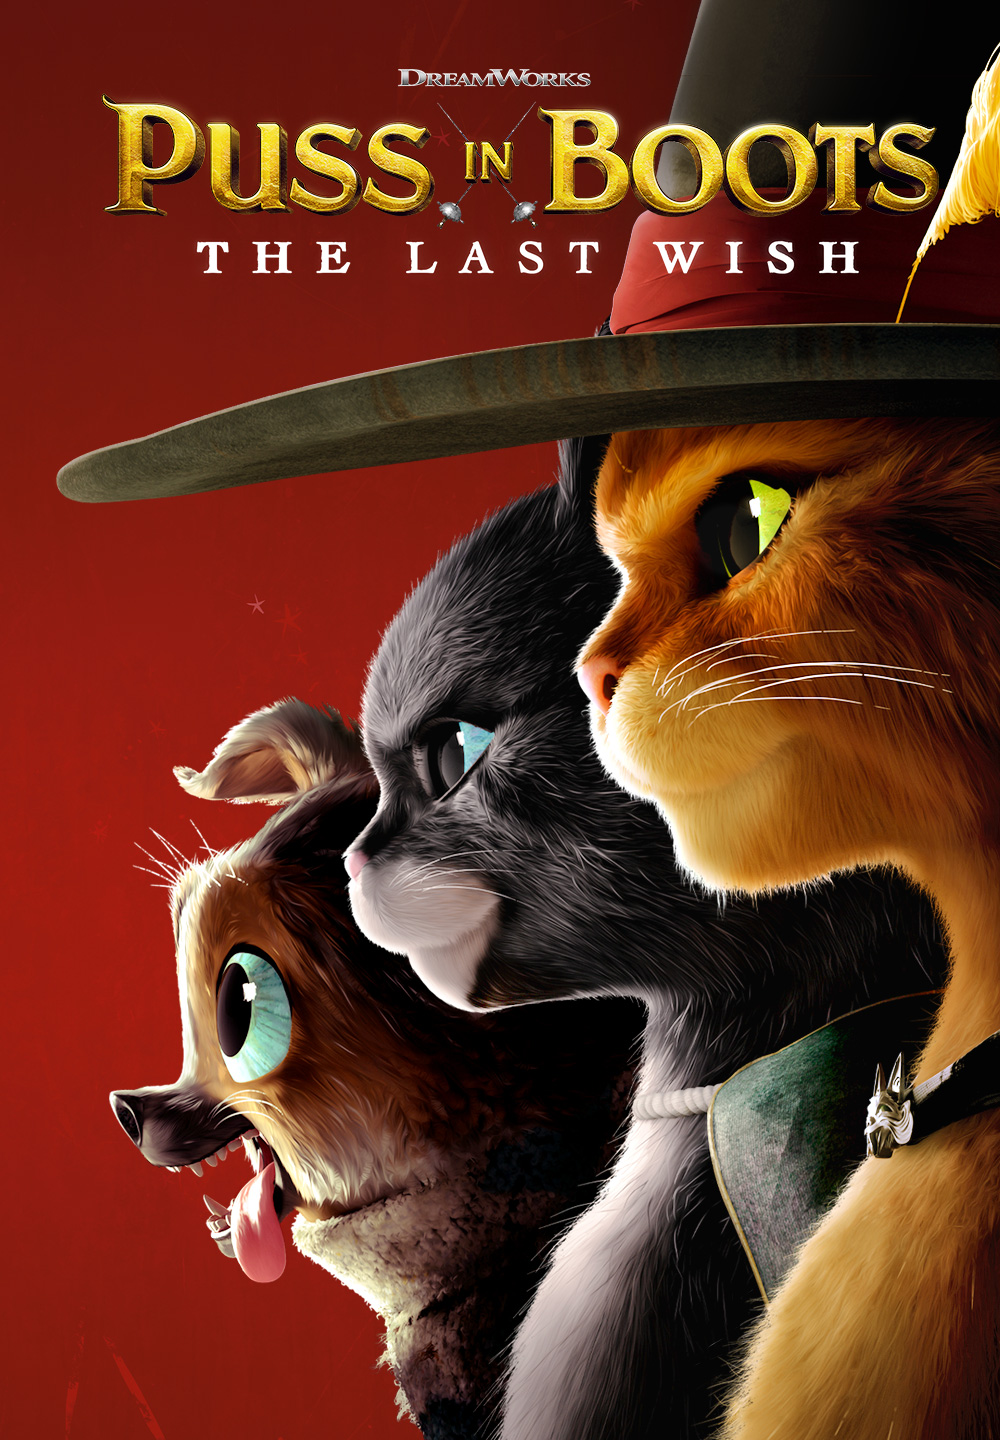 Watch Now Puss in Boots: The Last Wish in UHD | GRUV Digital